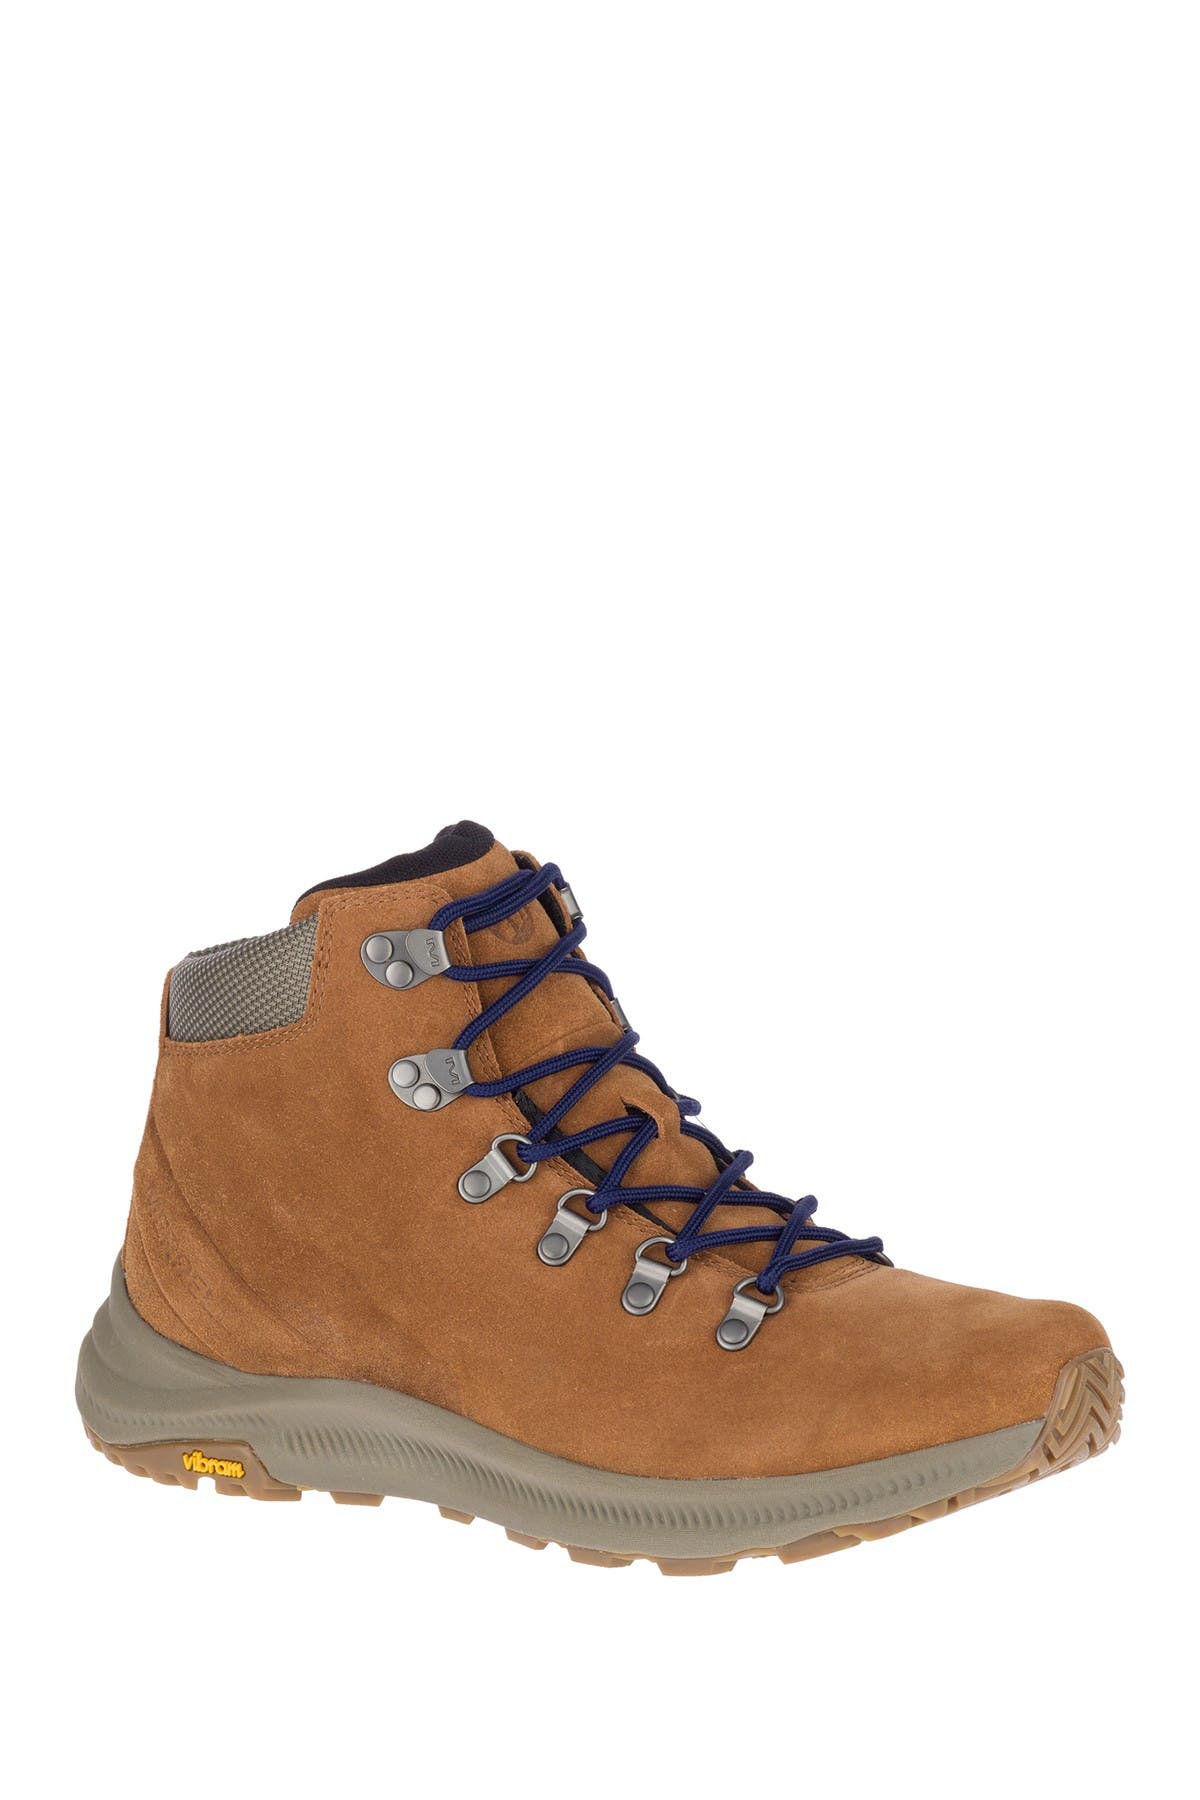 Merrell | Ontario Suede Mid Hiking Boot 